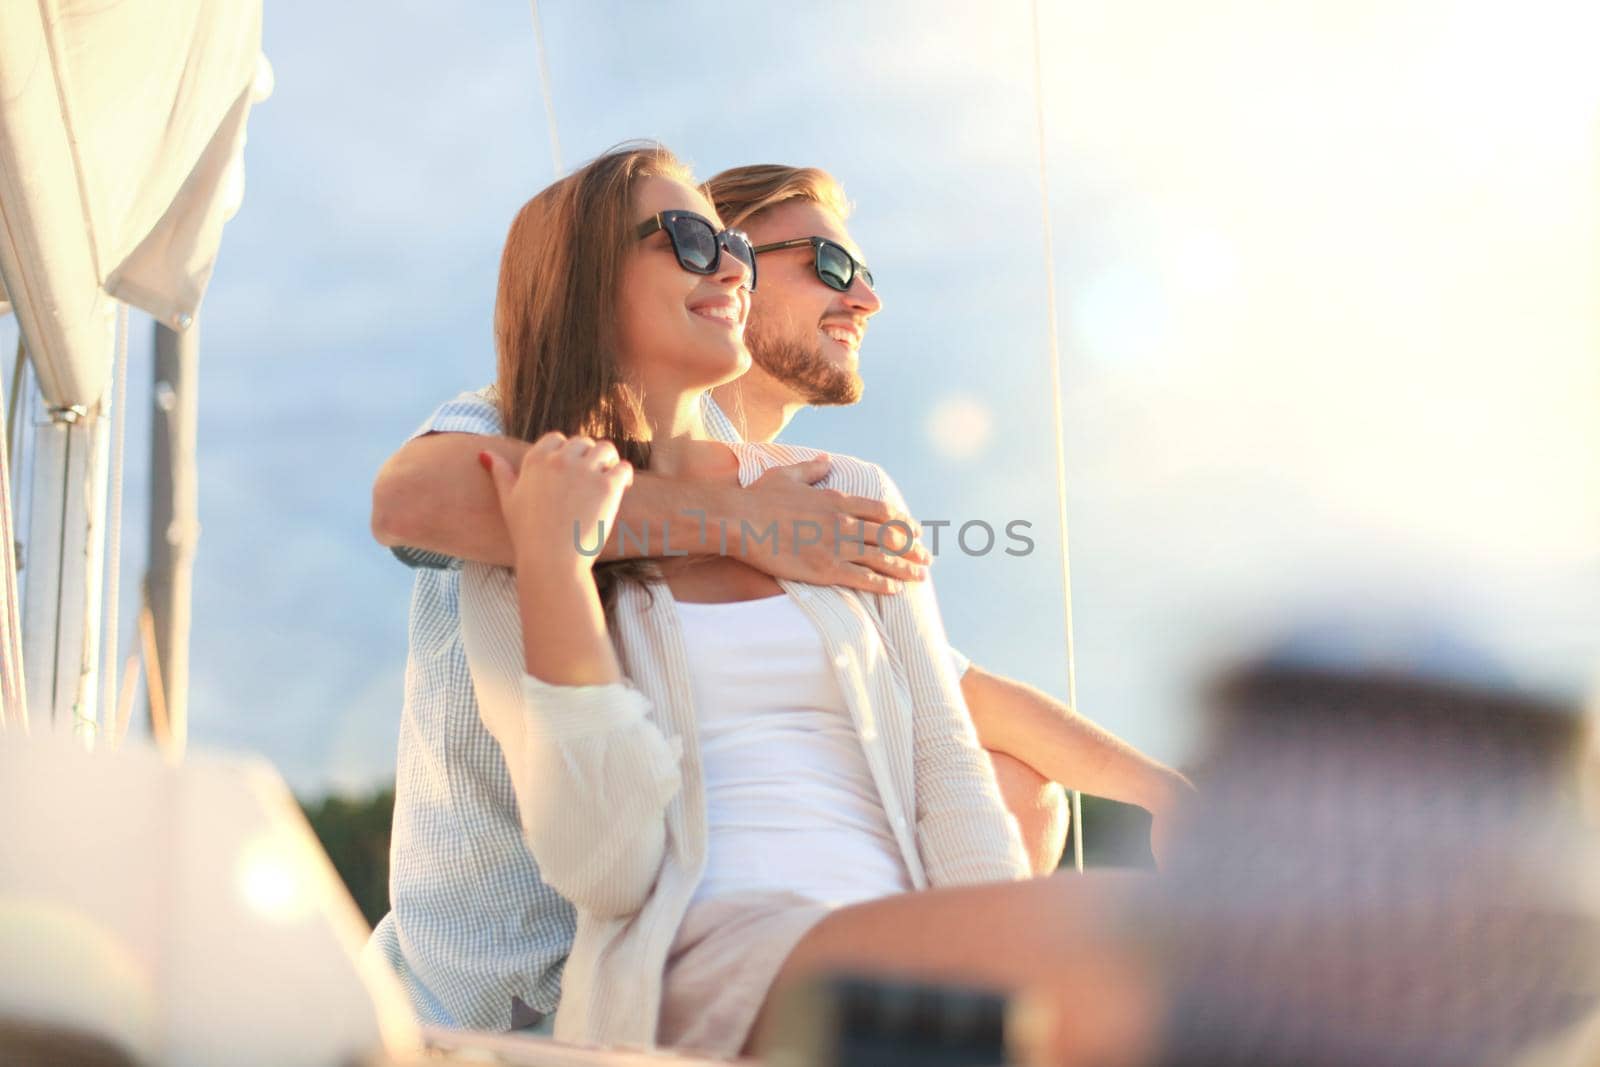 Attractive couple on a yacht enjoy bright sunny day on vacation.